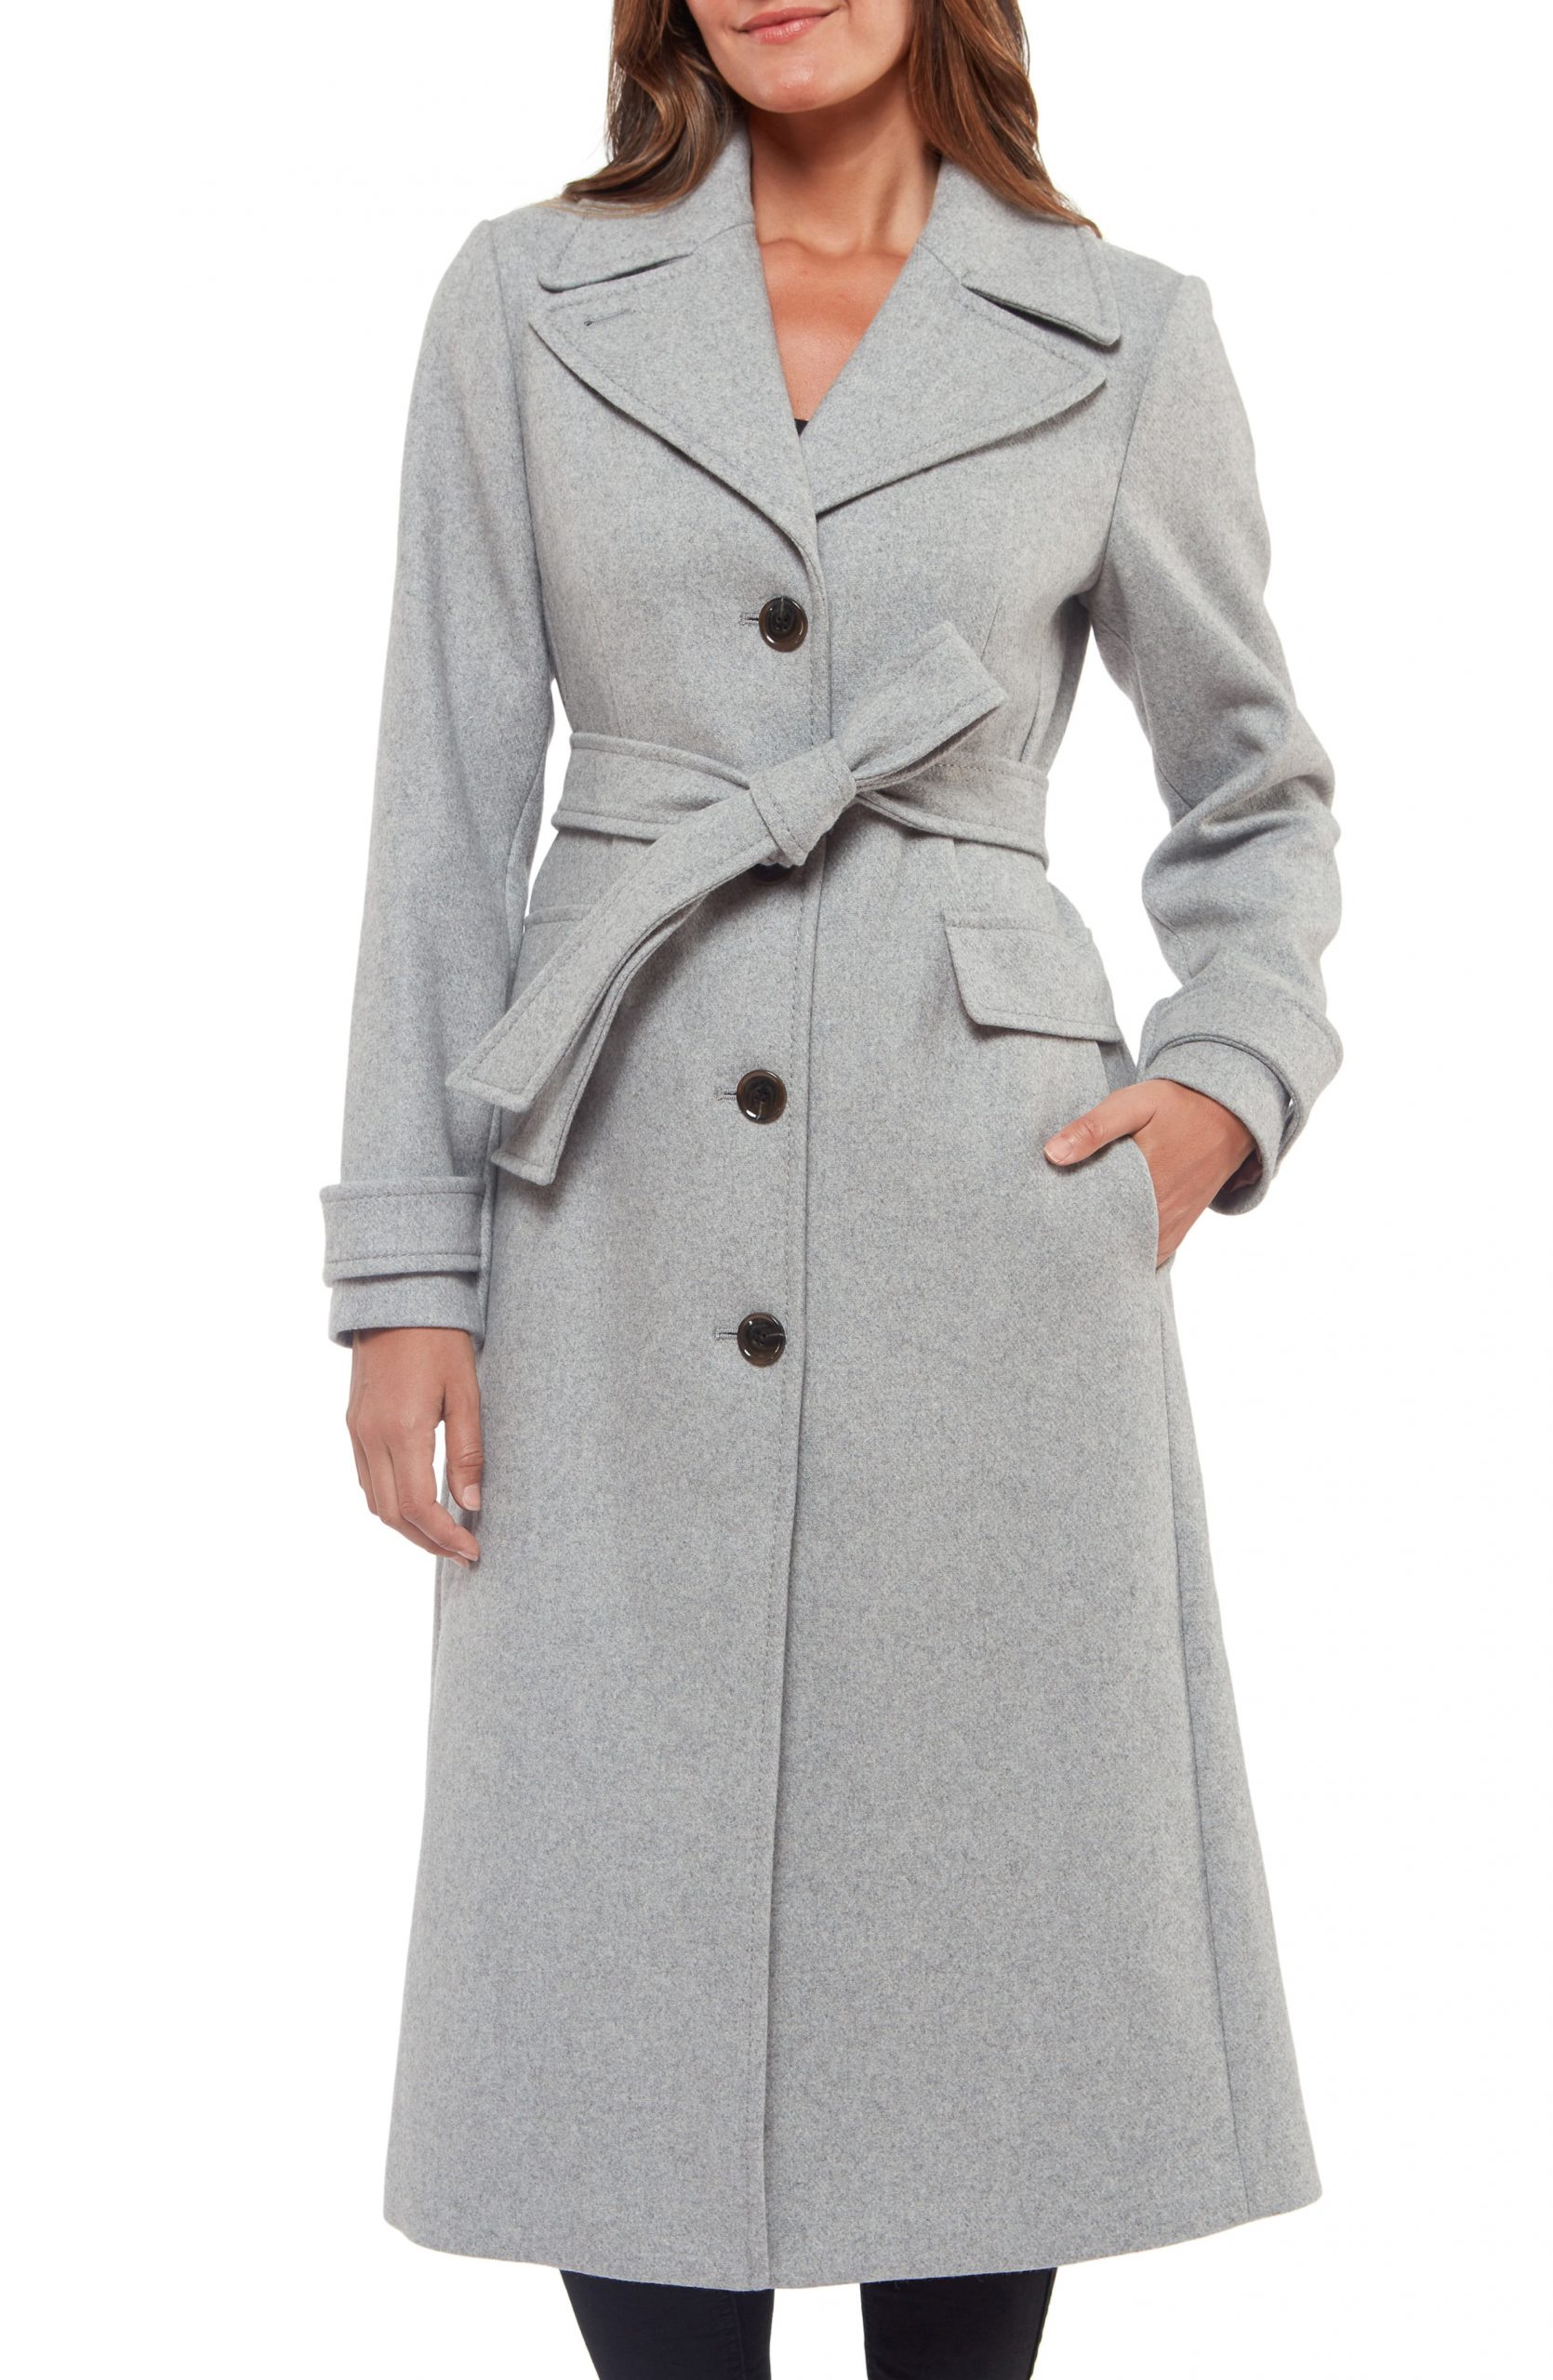 Women’s Kate Spade New York Belted Wool Blend Coat, Size X-Small - Grey ...